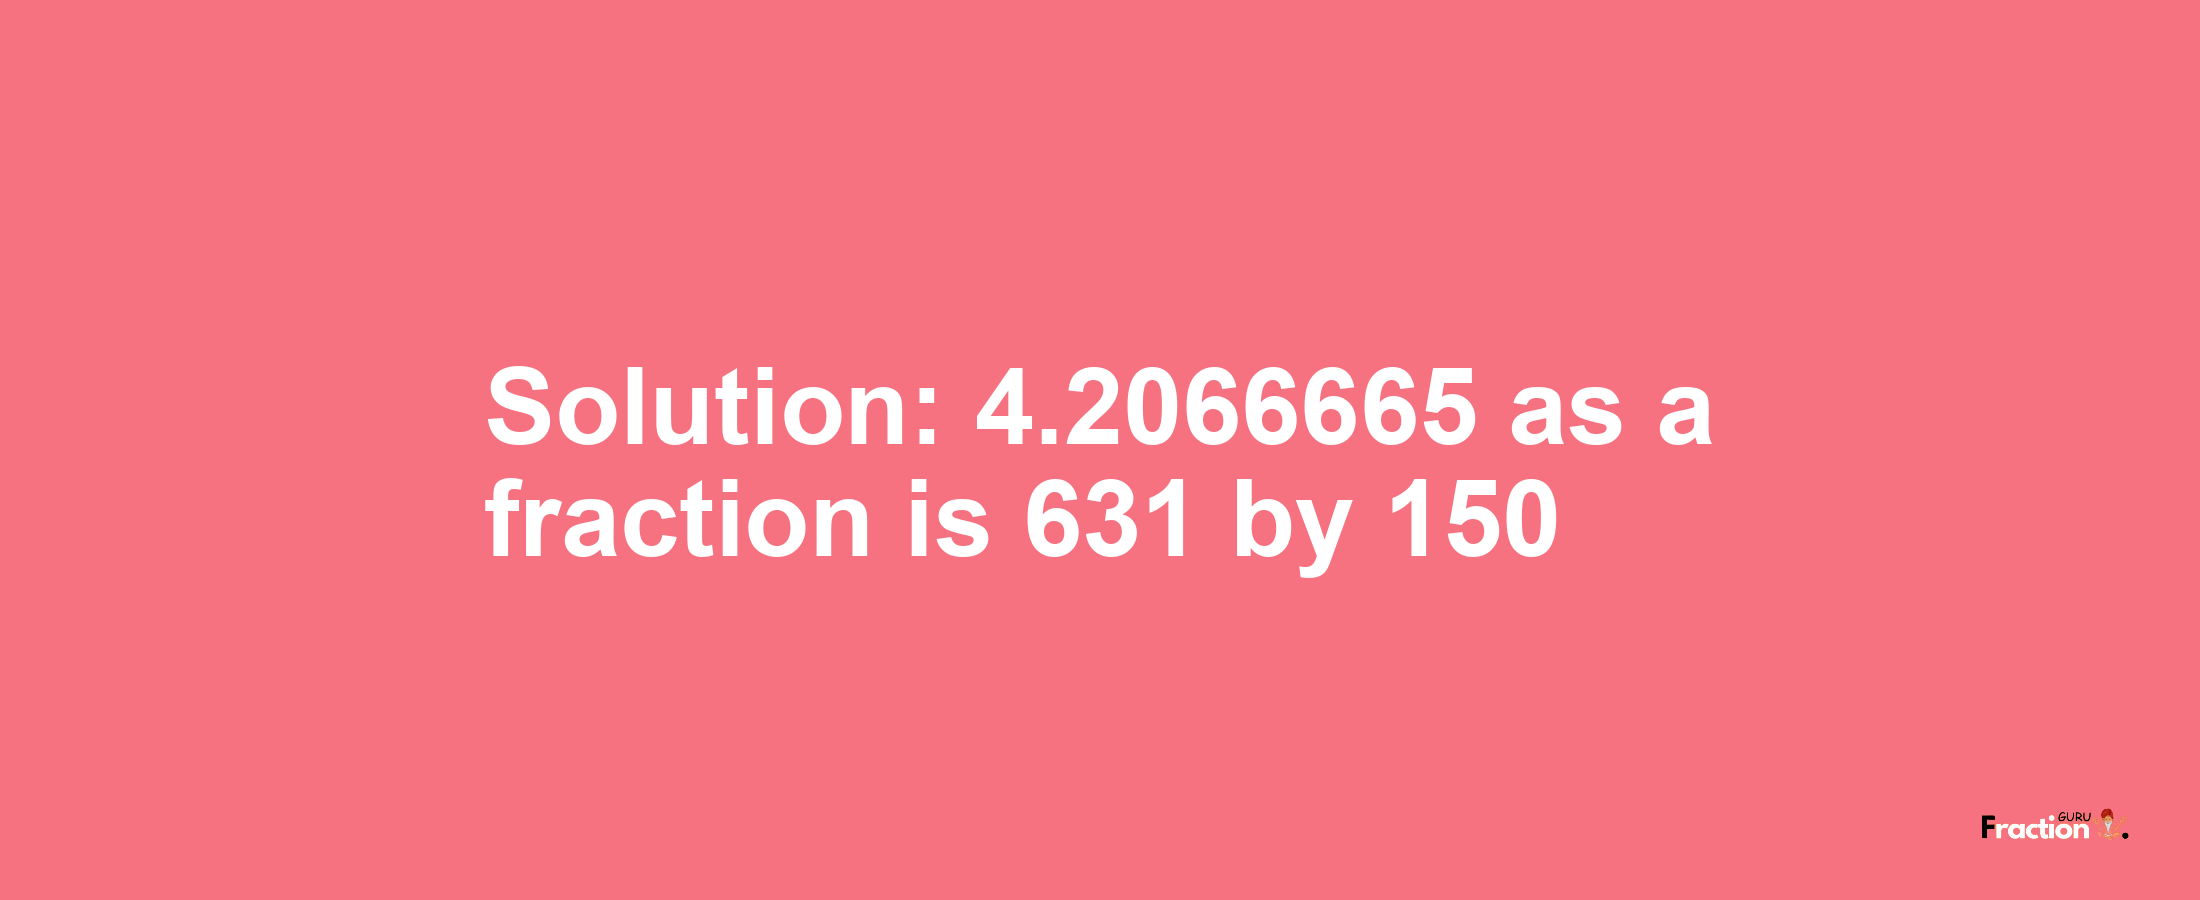 Solution:4.2066665 as a fraction is 631/150